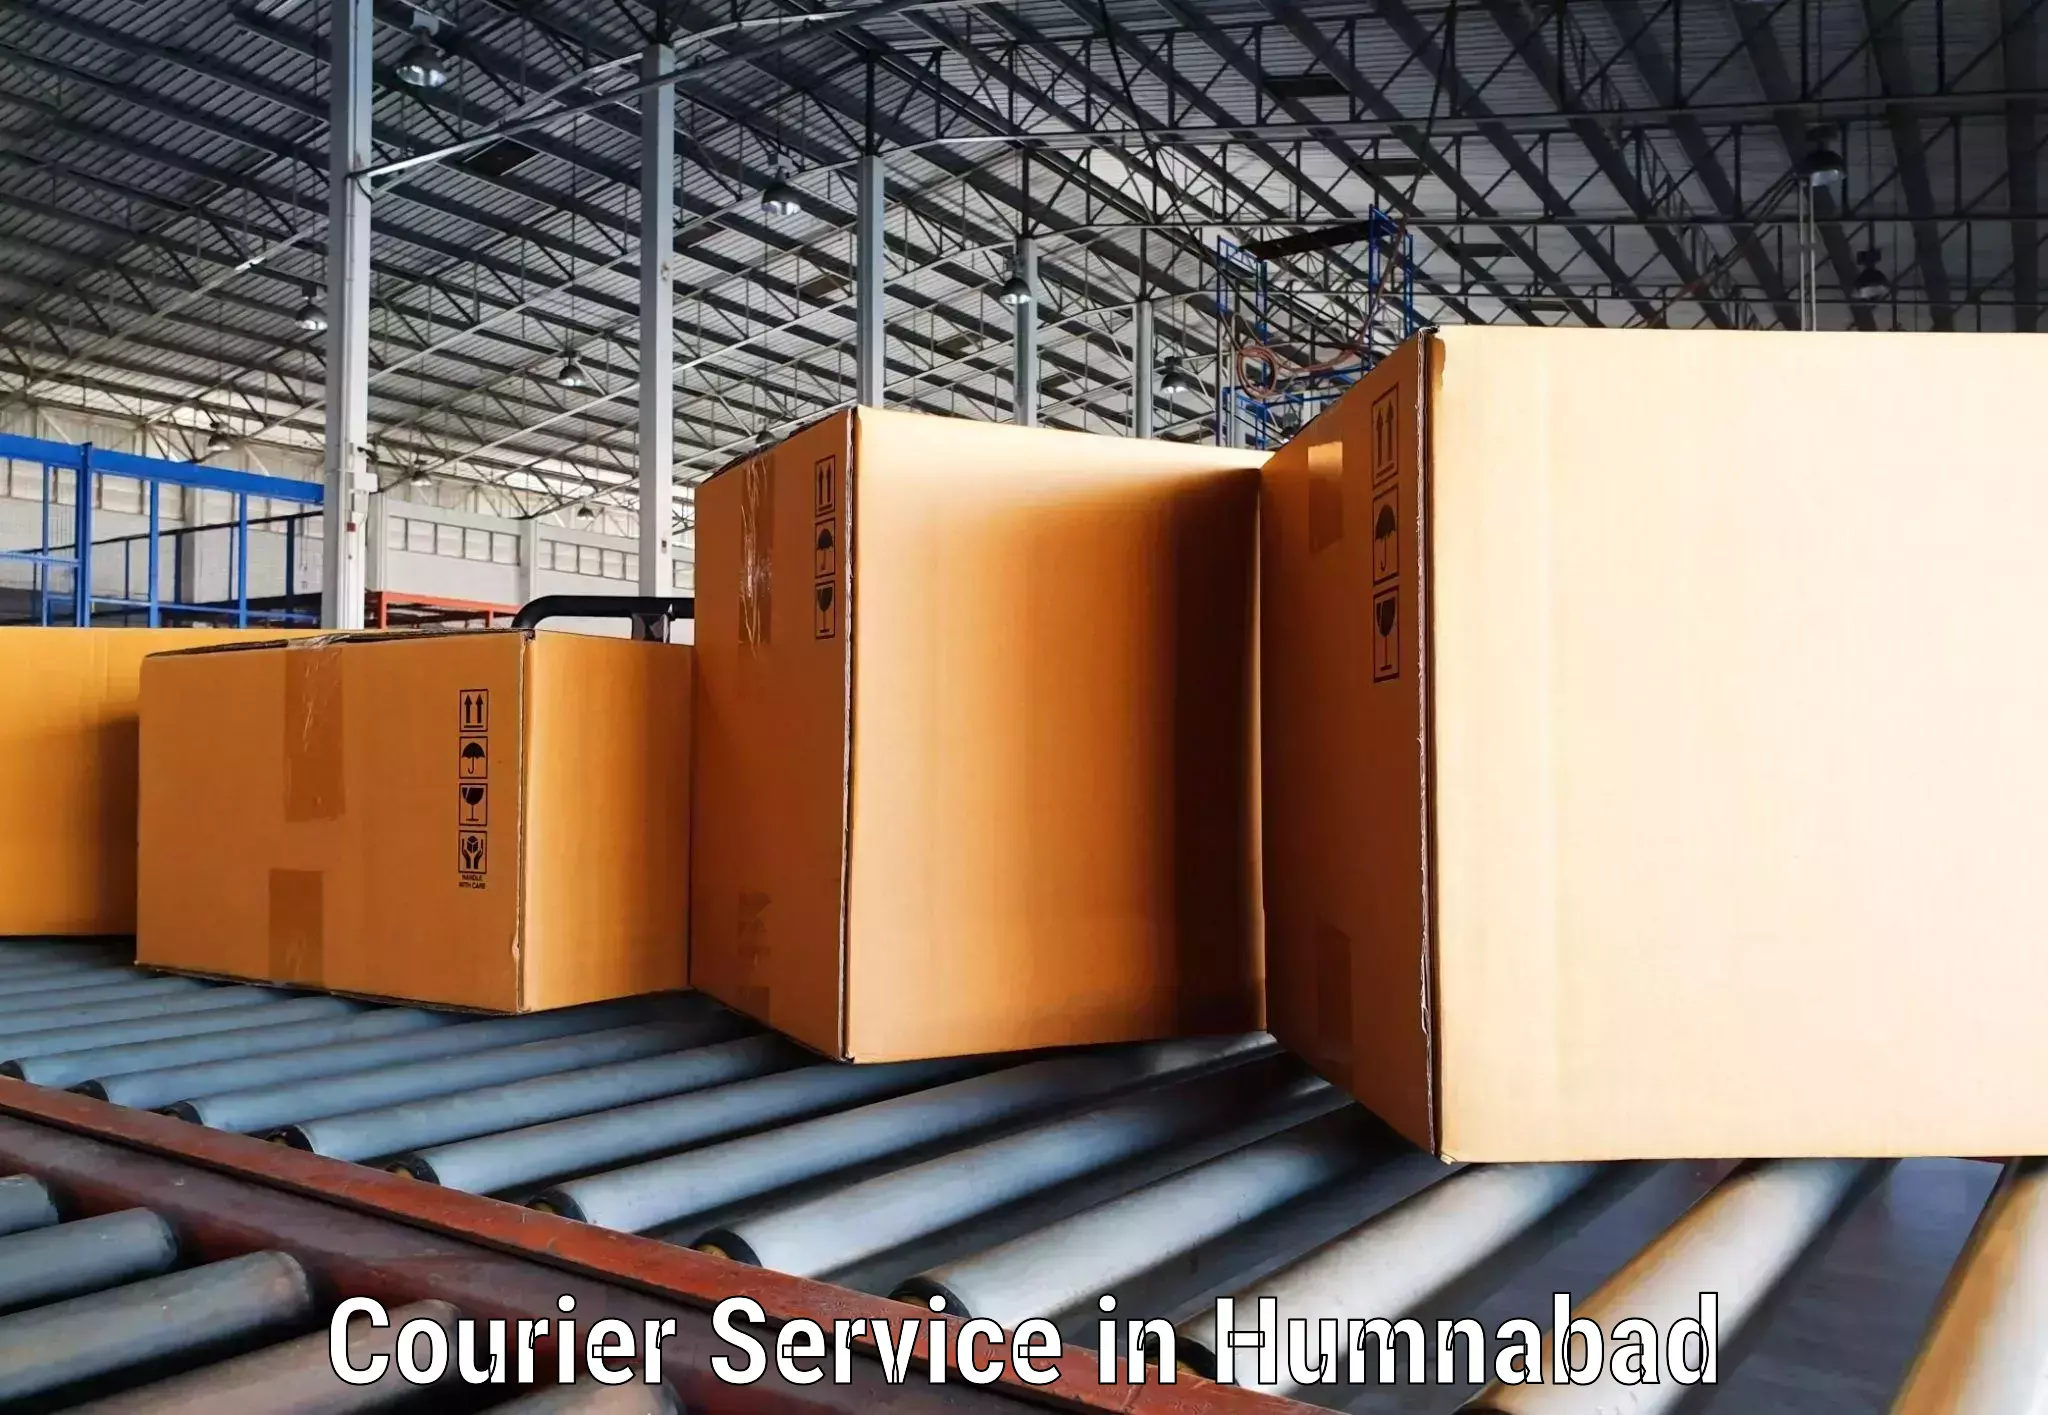 High-capacity shipping options in Humnabad